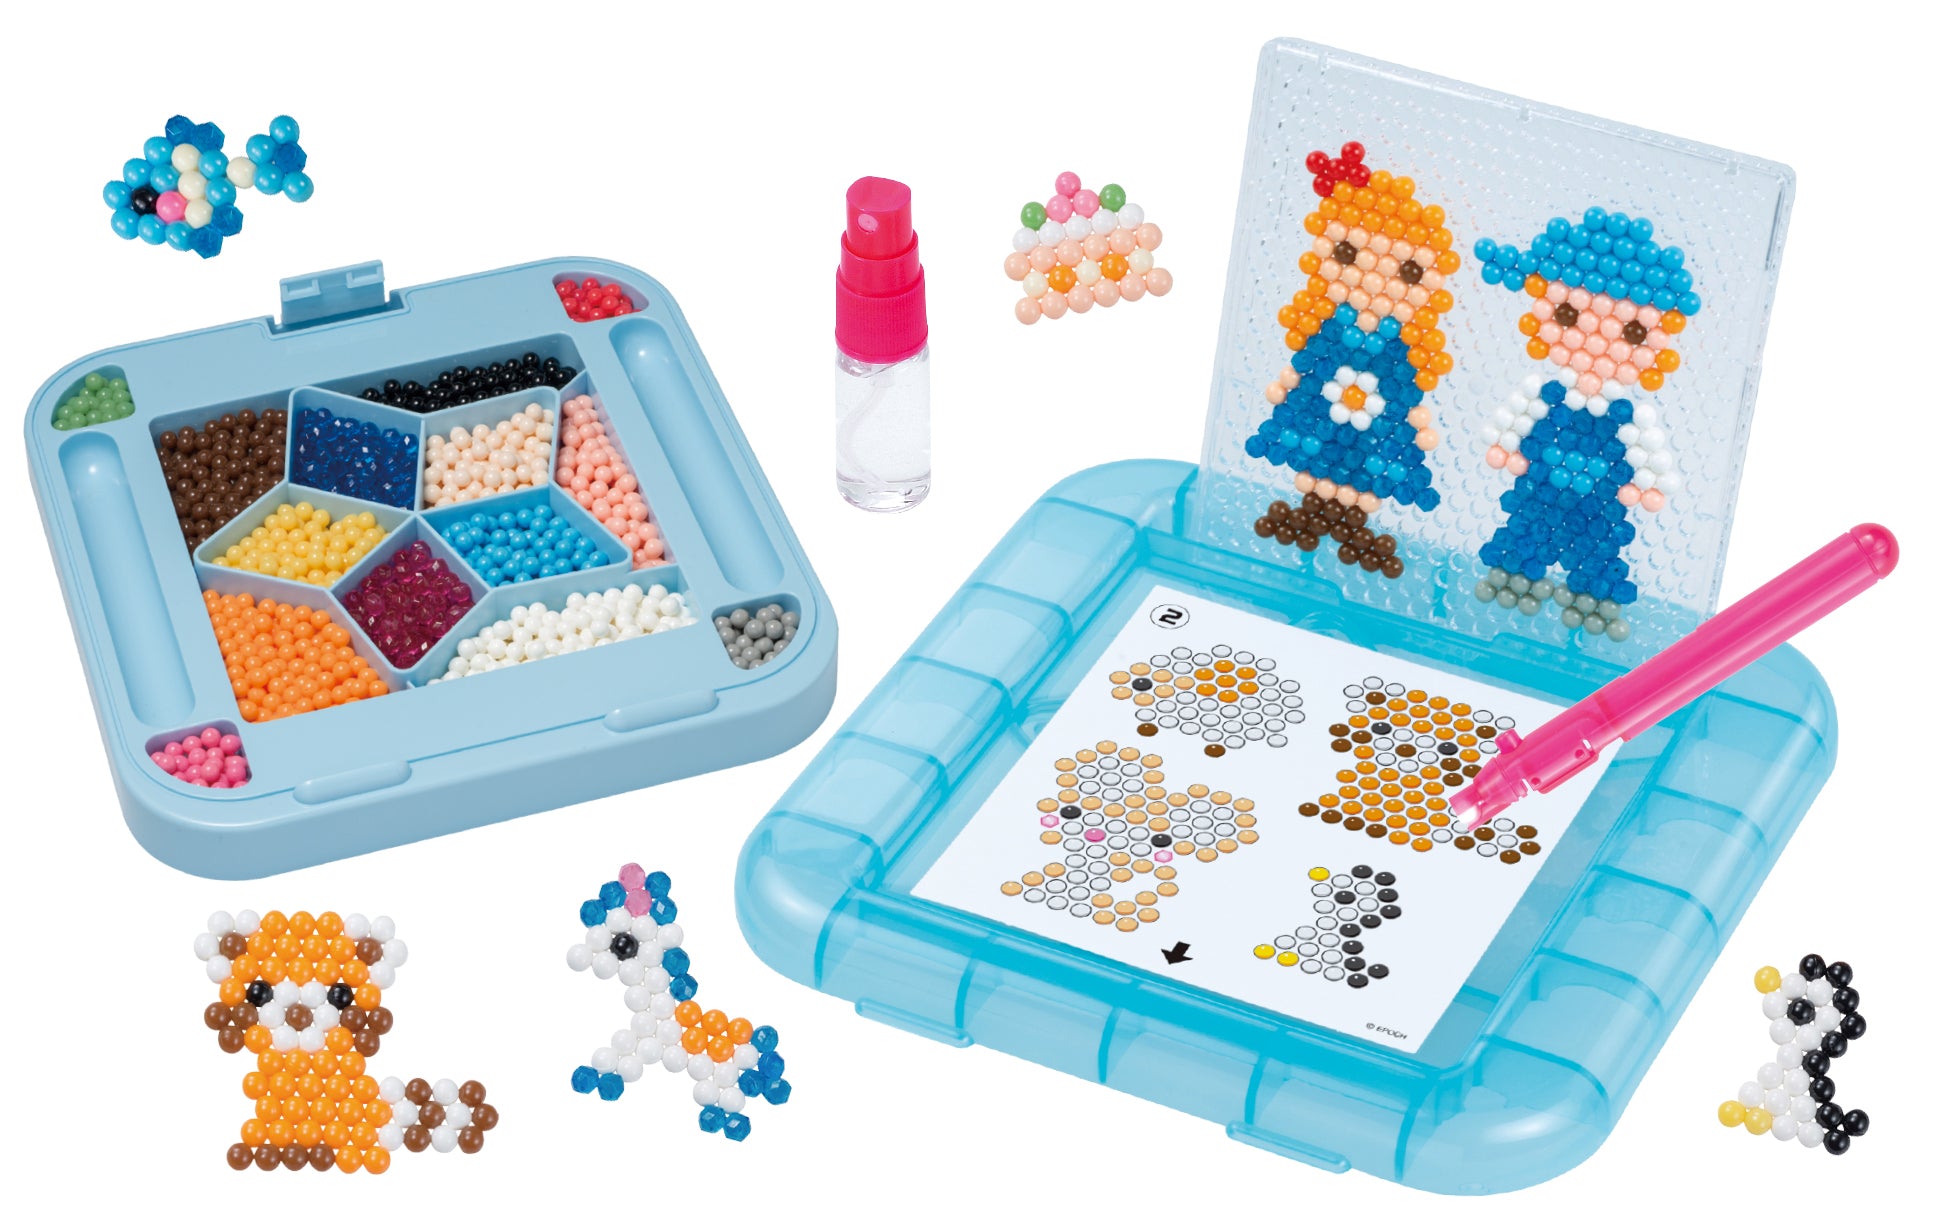 Aquabeads Starter Set (4+ years) - Alouette